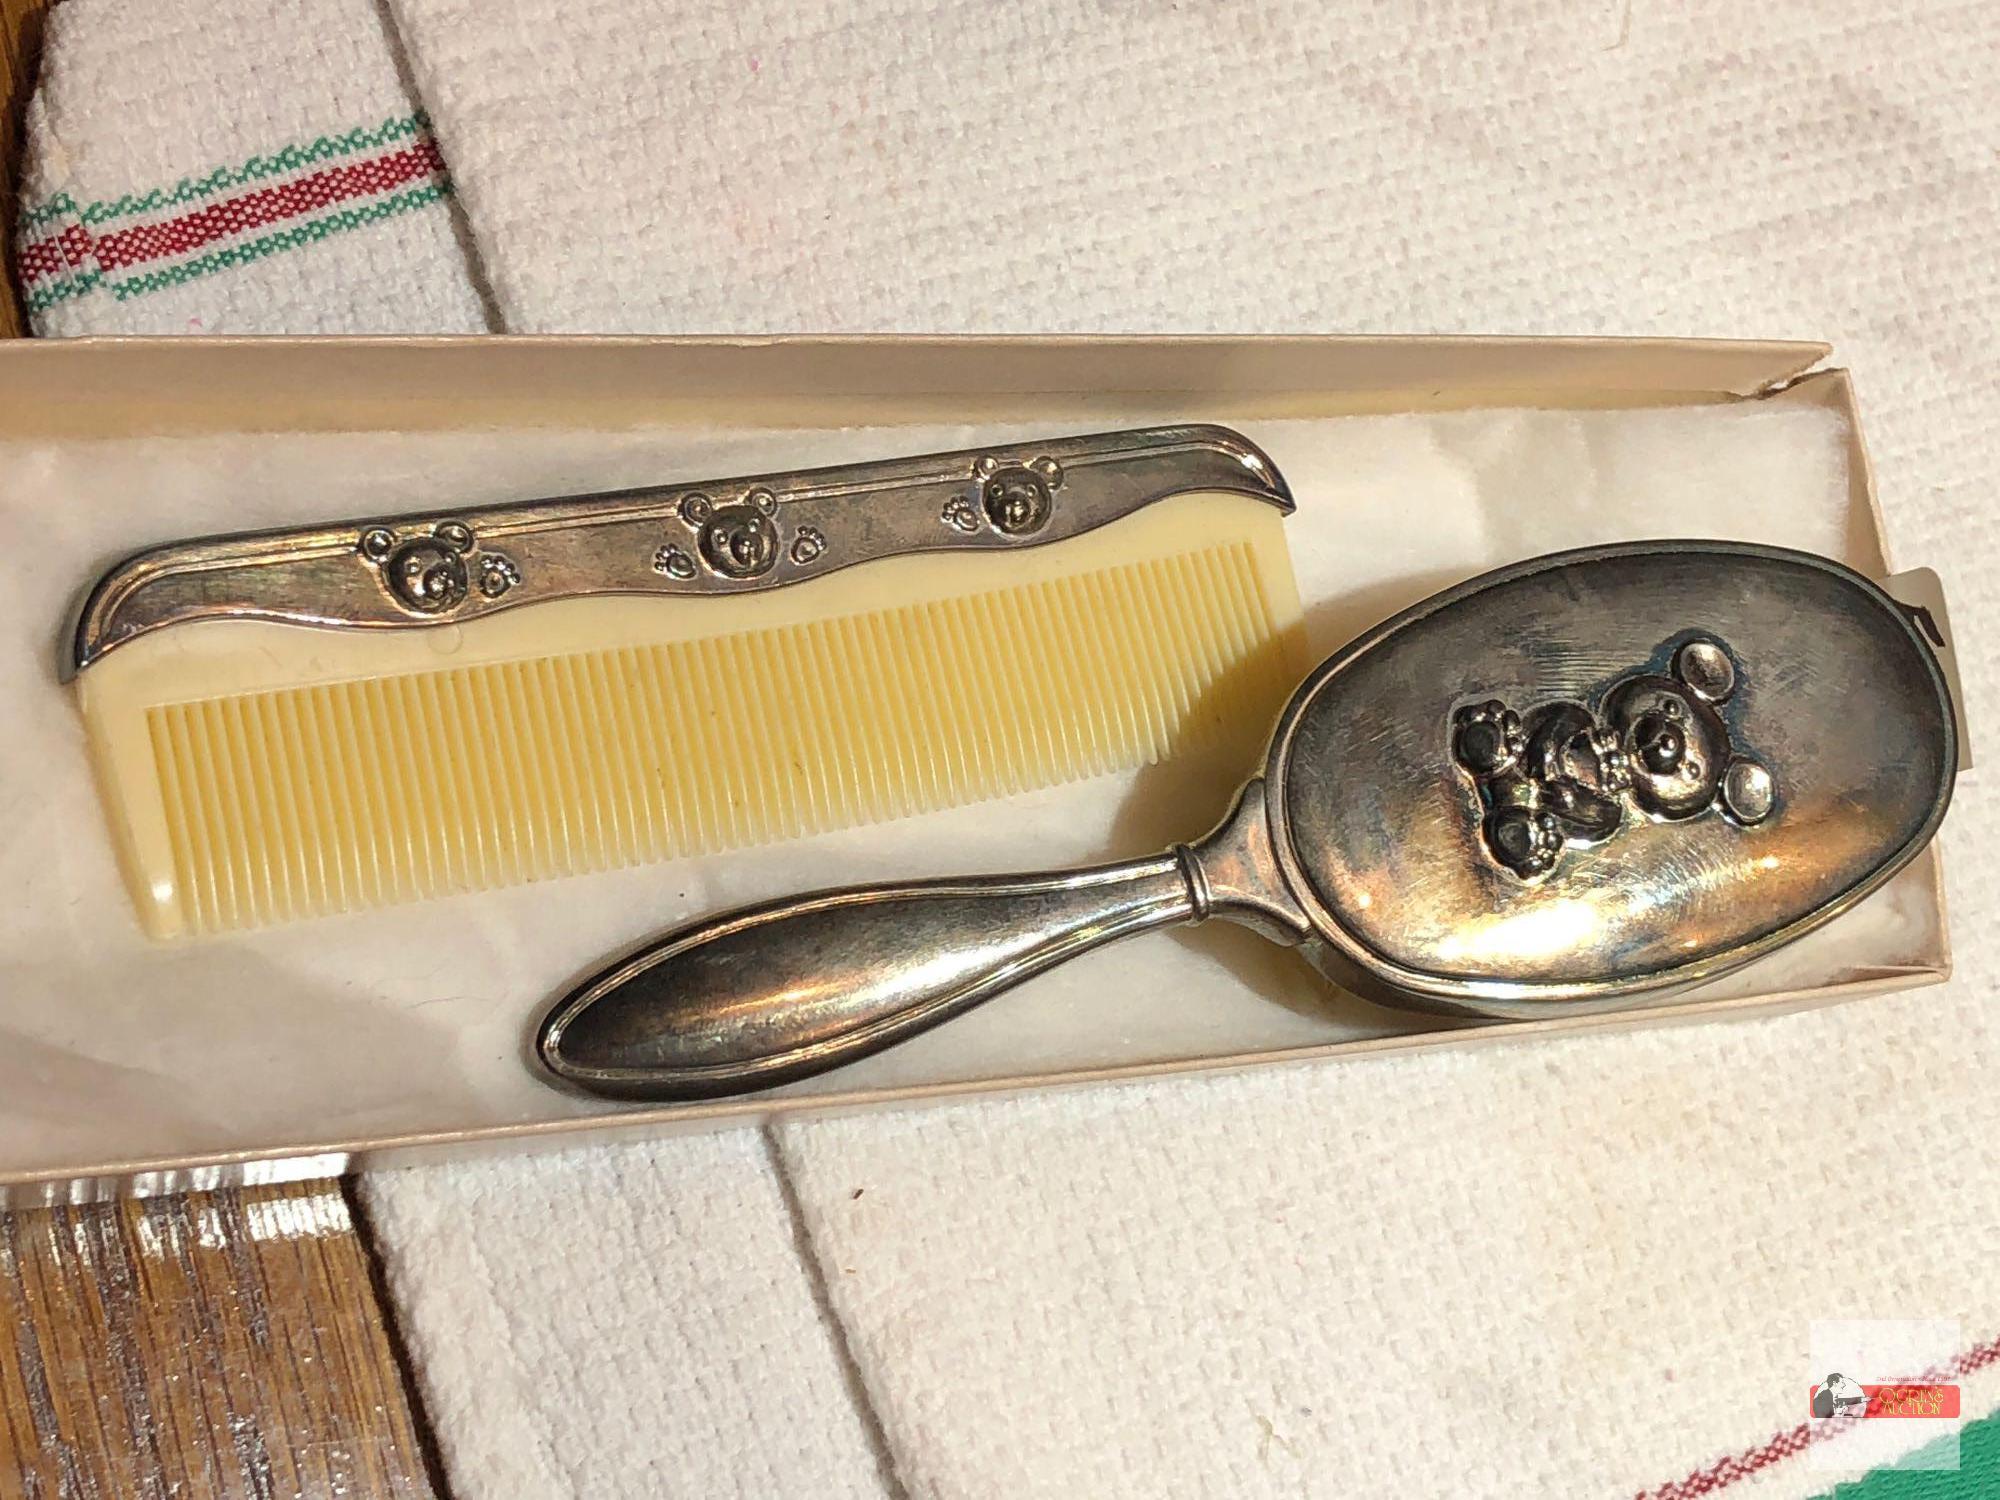 Baby items - silver plated brush & matching comb, bears motif